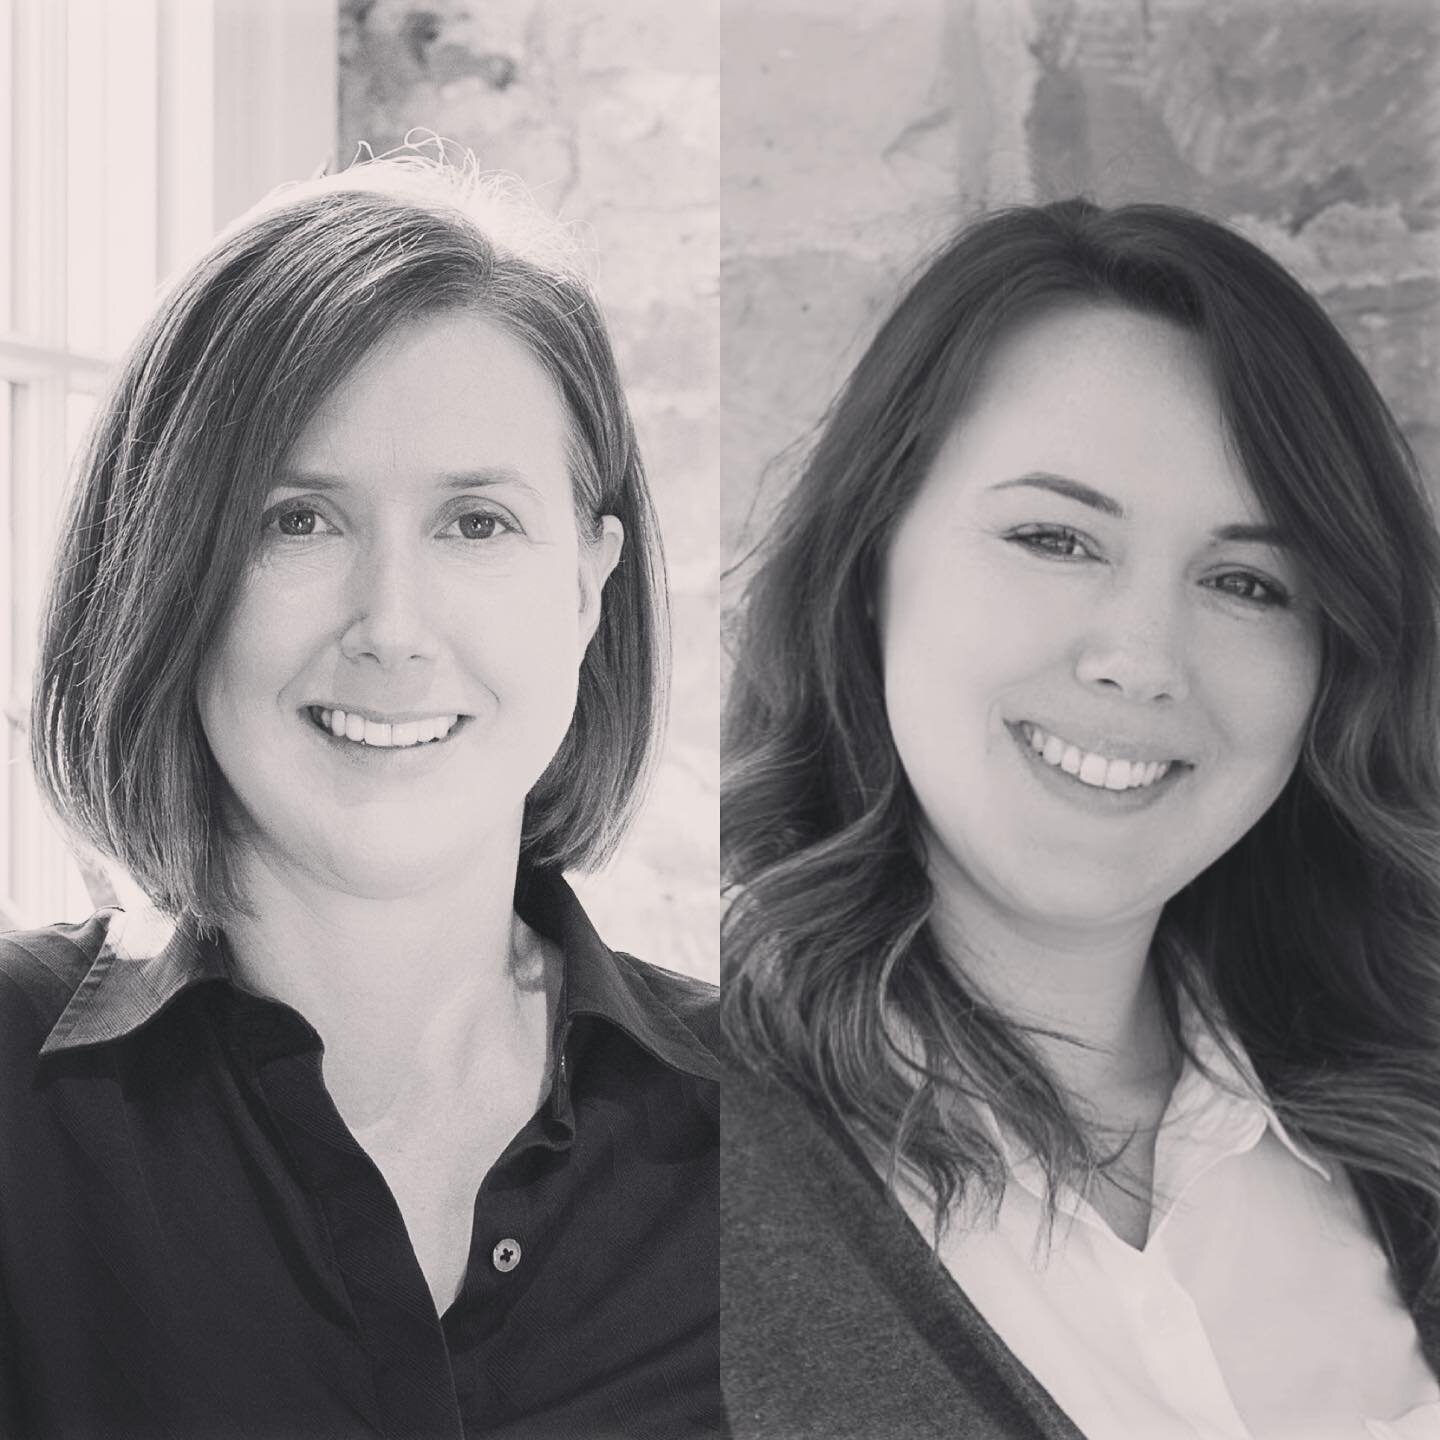 In spirit of #internationalwomensday and #womeninconstructionweek we put our spotlight on Cara Hering and Jordan Sandvig to recognize and thank our DK Women for their contributions to our team and to our industry.